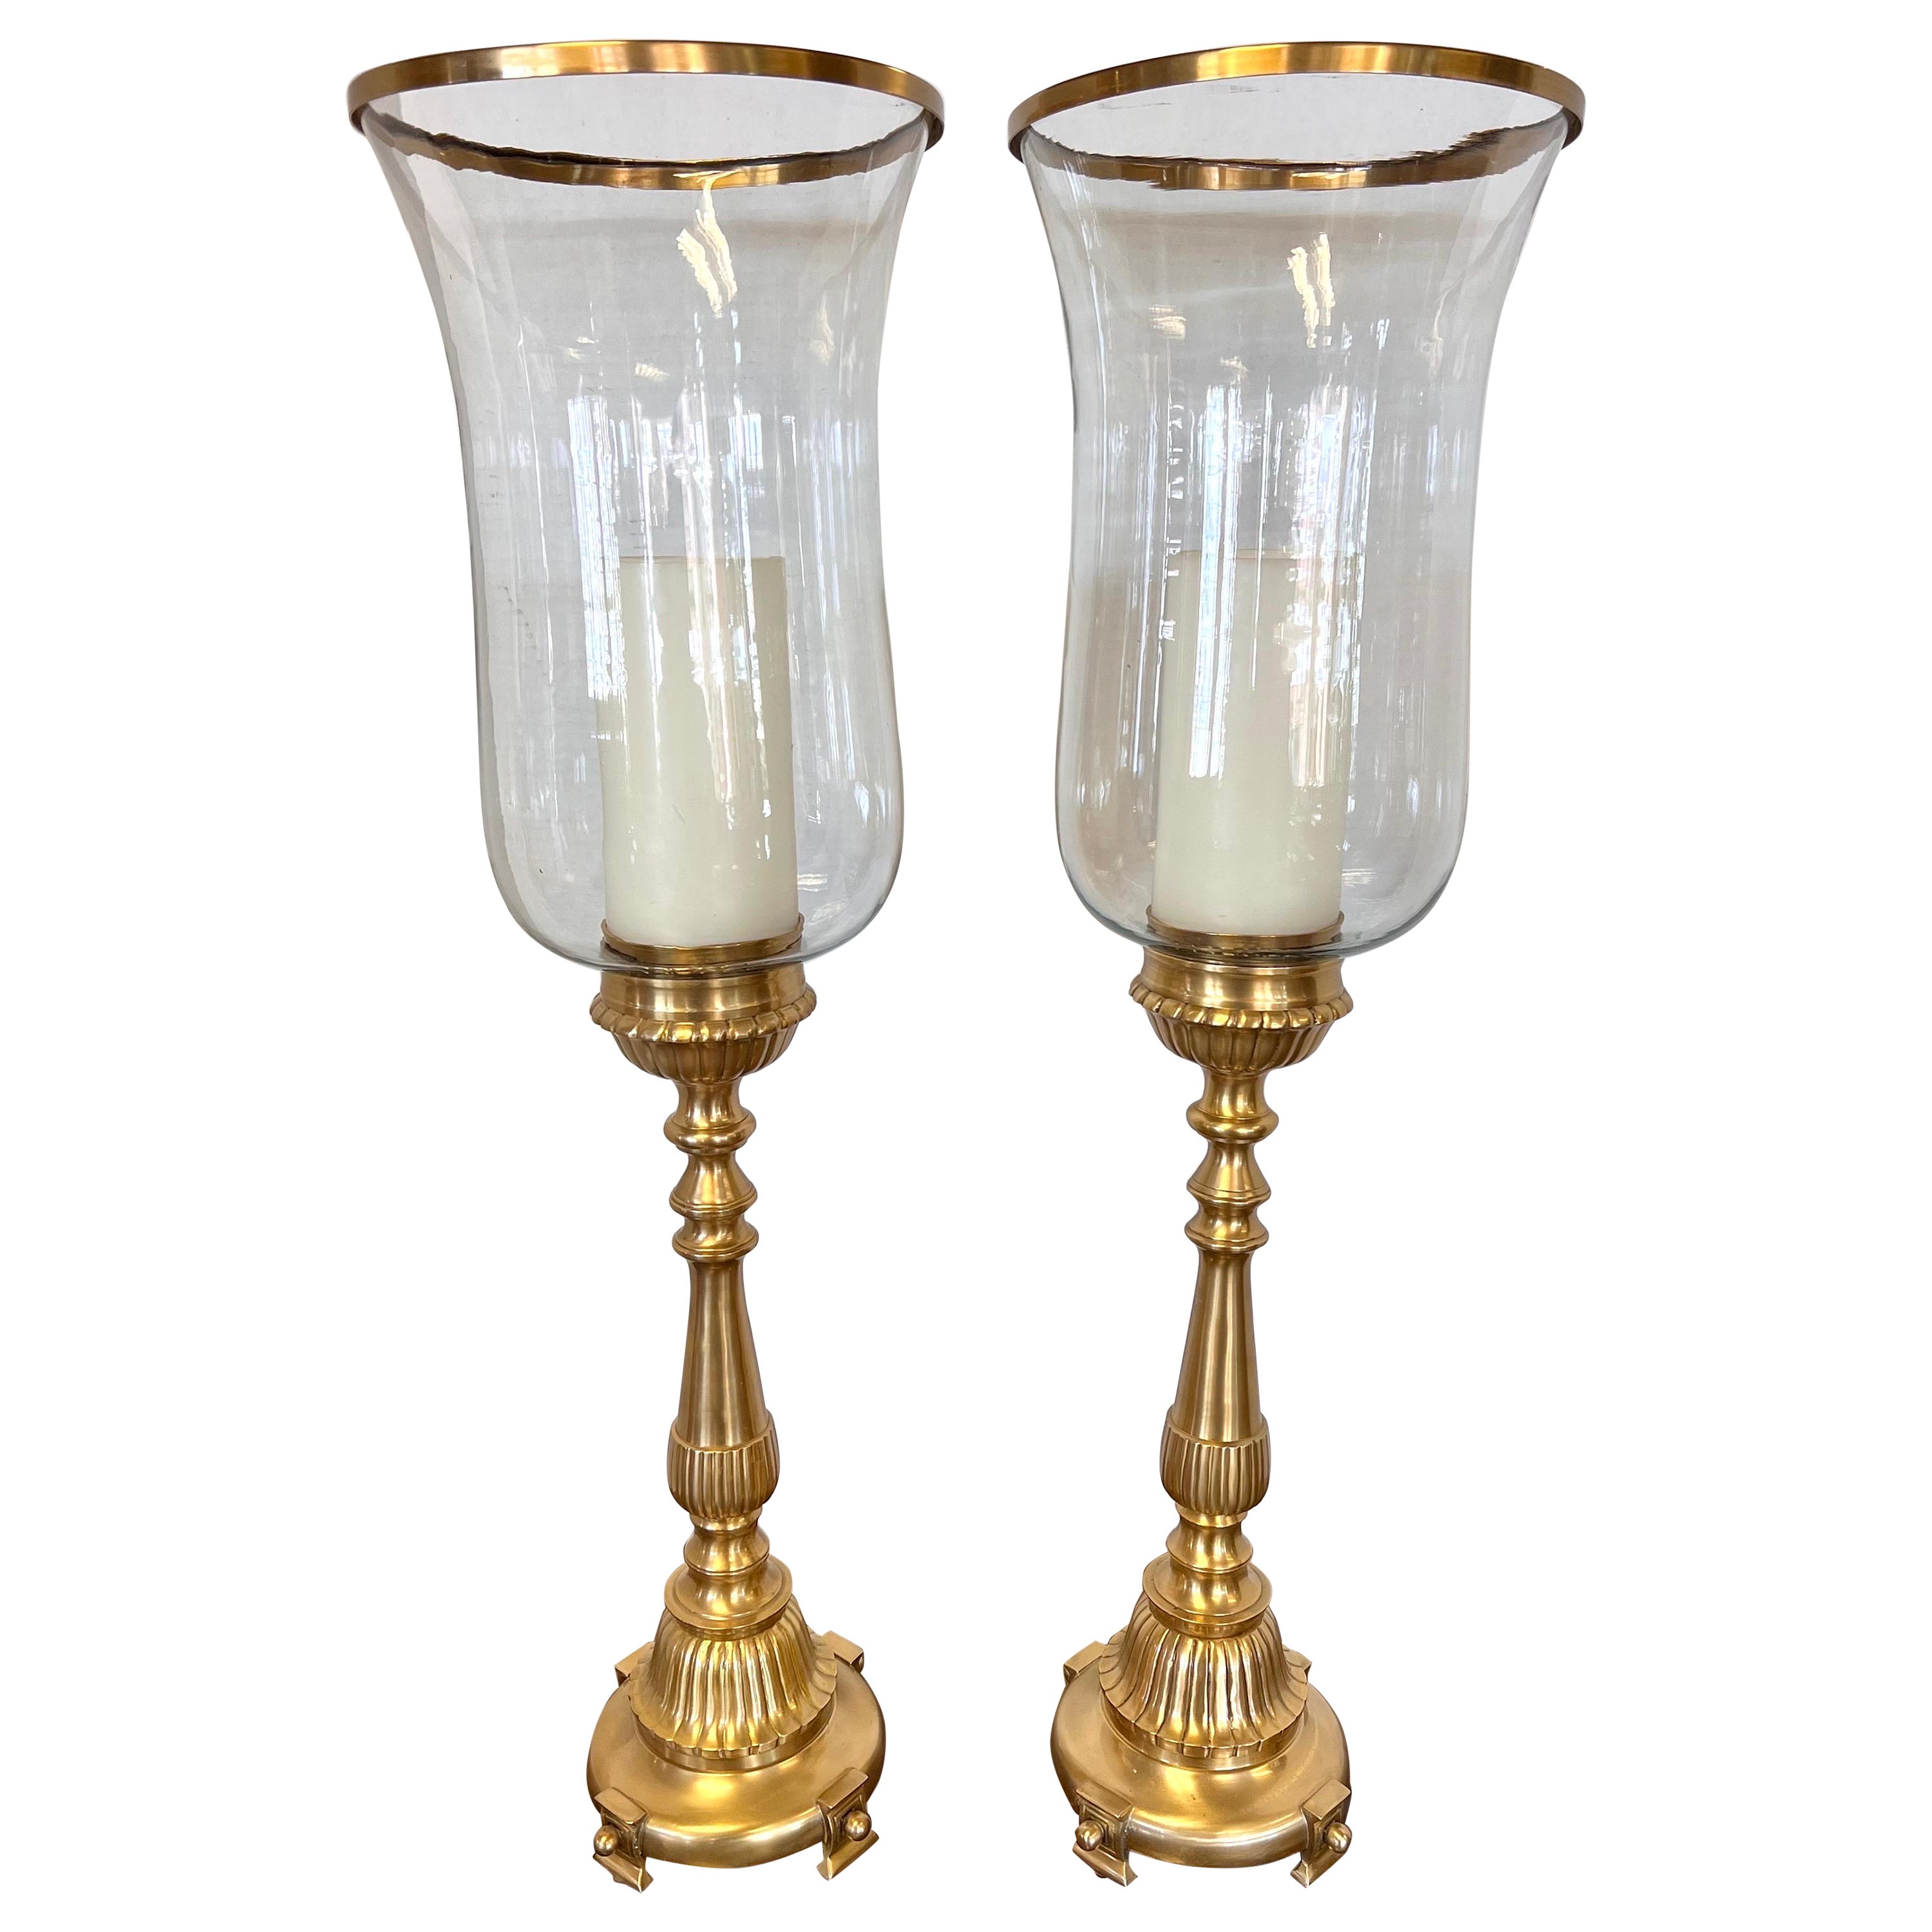 Pair of Tall Brass Candle Holders with Glass Hurricanes